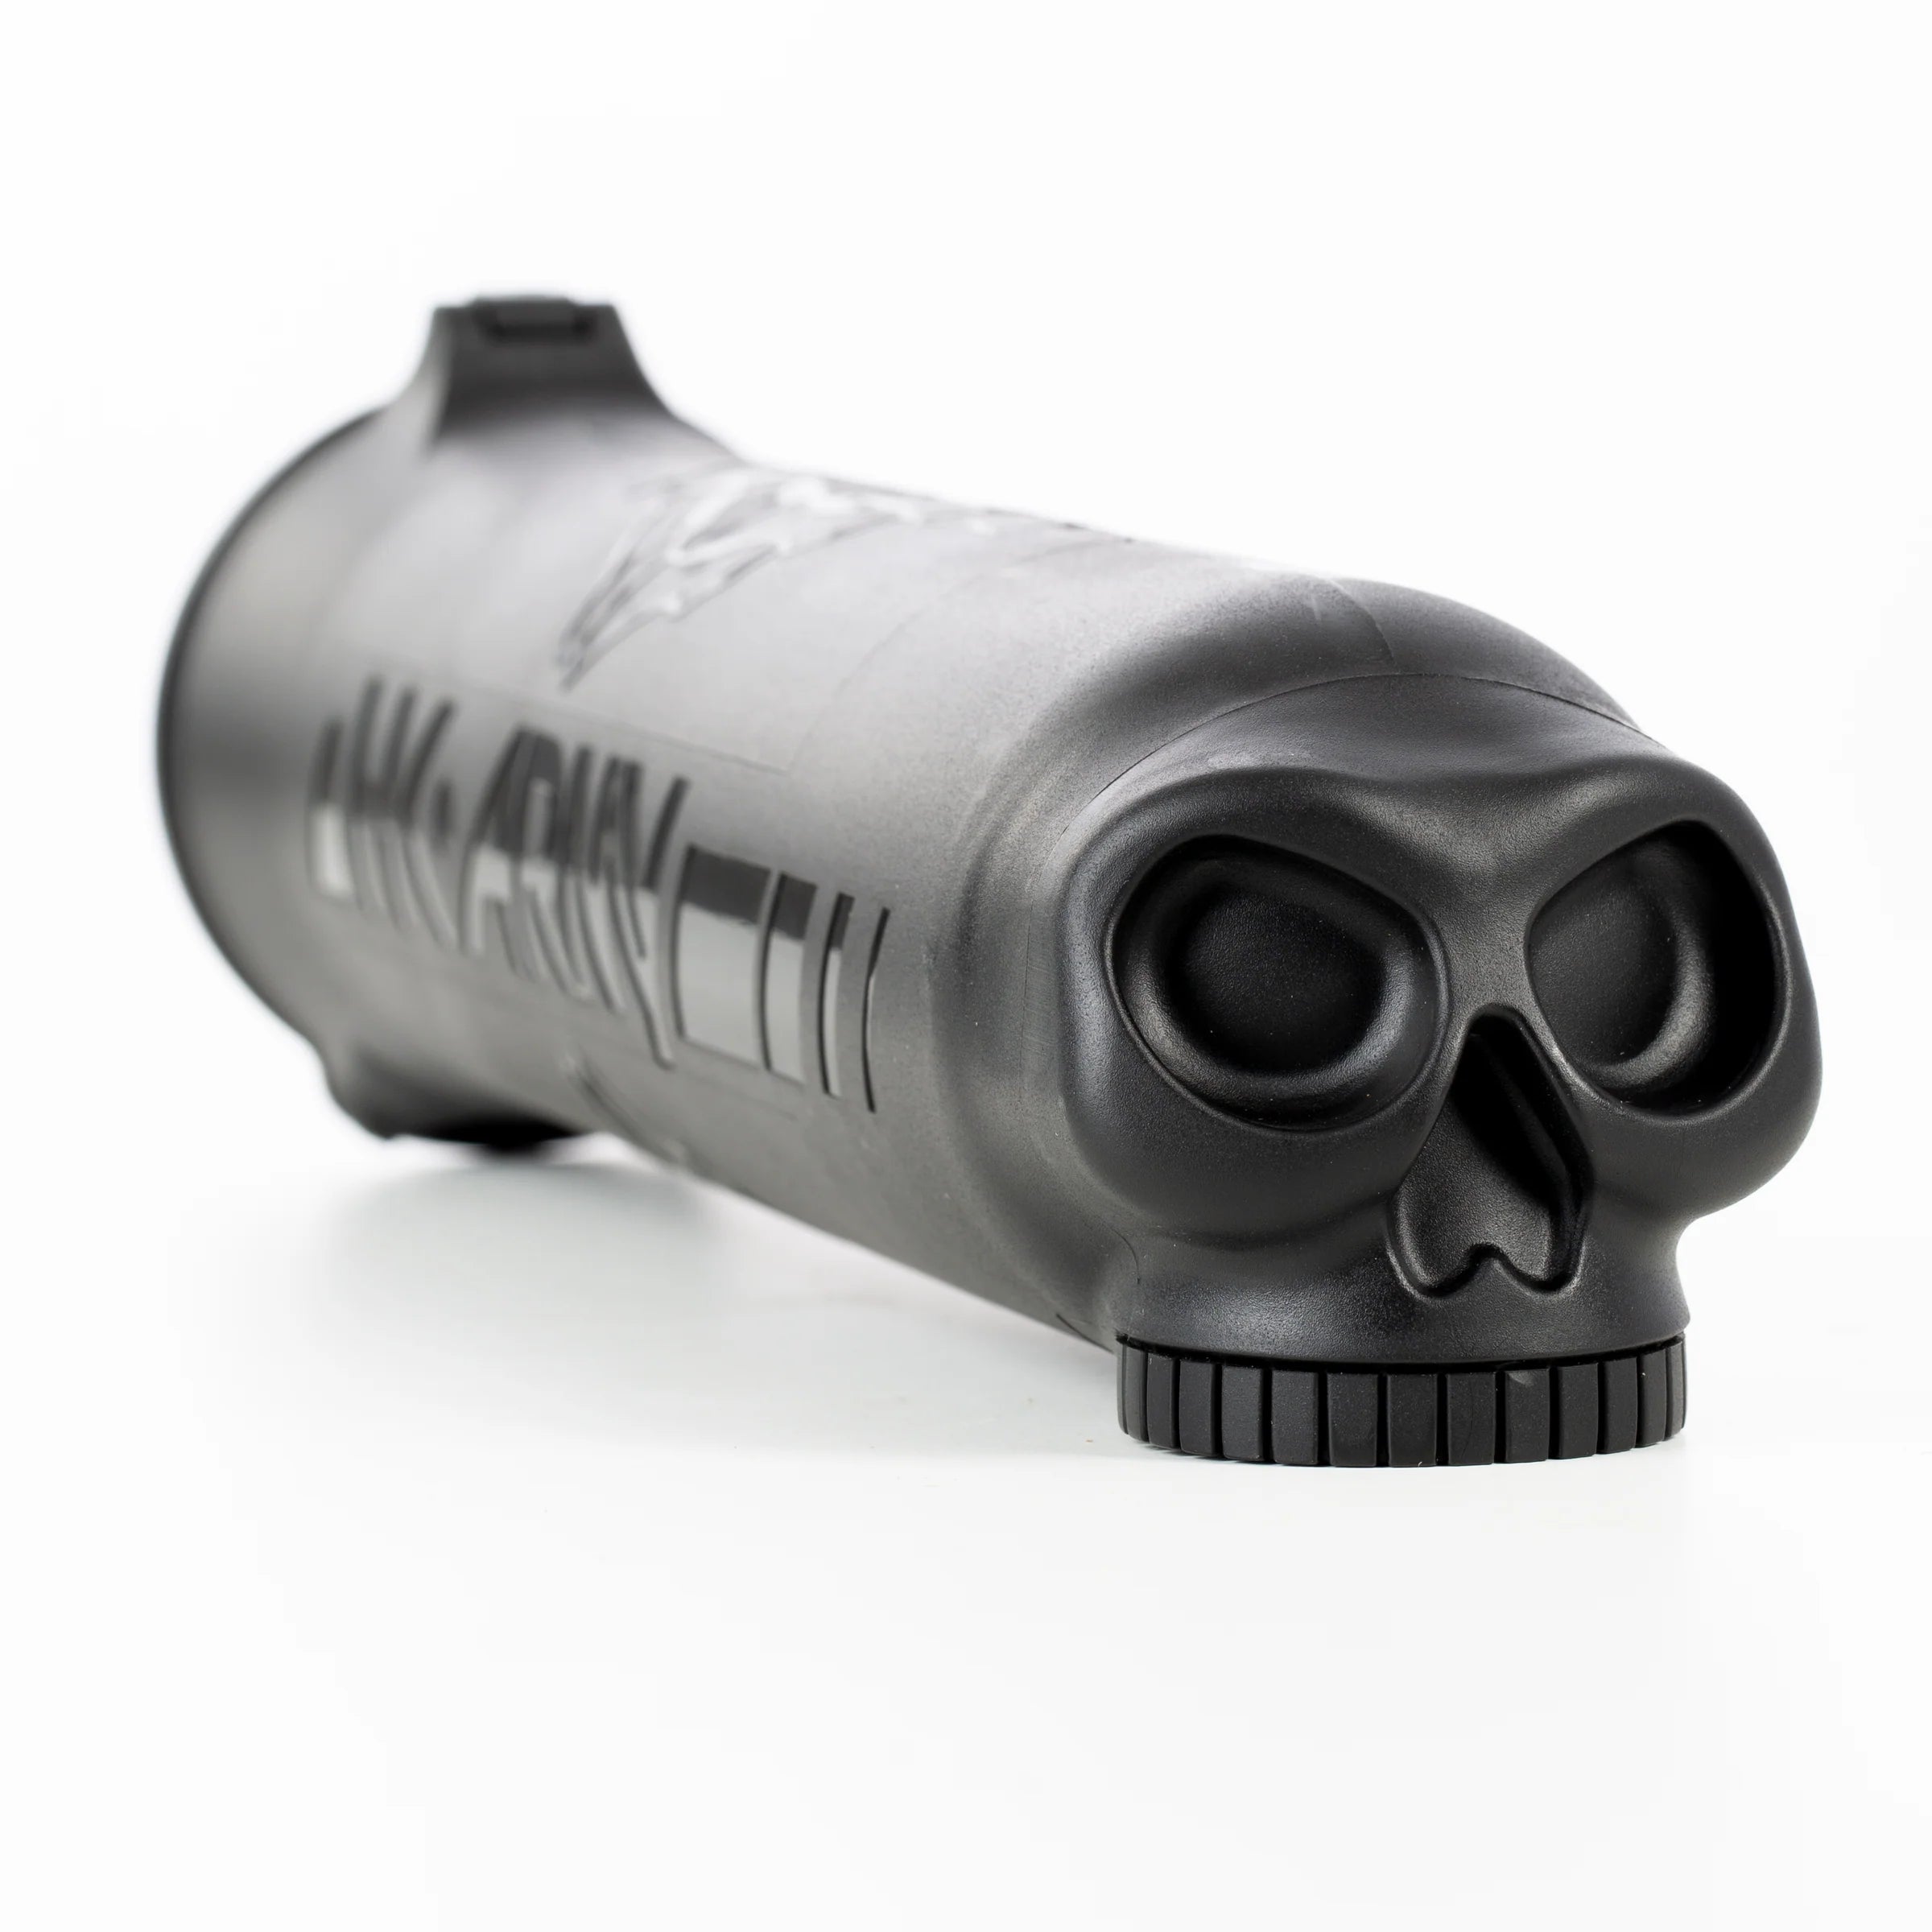 HK Army Skull Pods - High Capacity 150rd (6-Pack) - ssairsoft.com